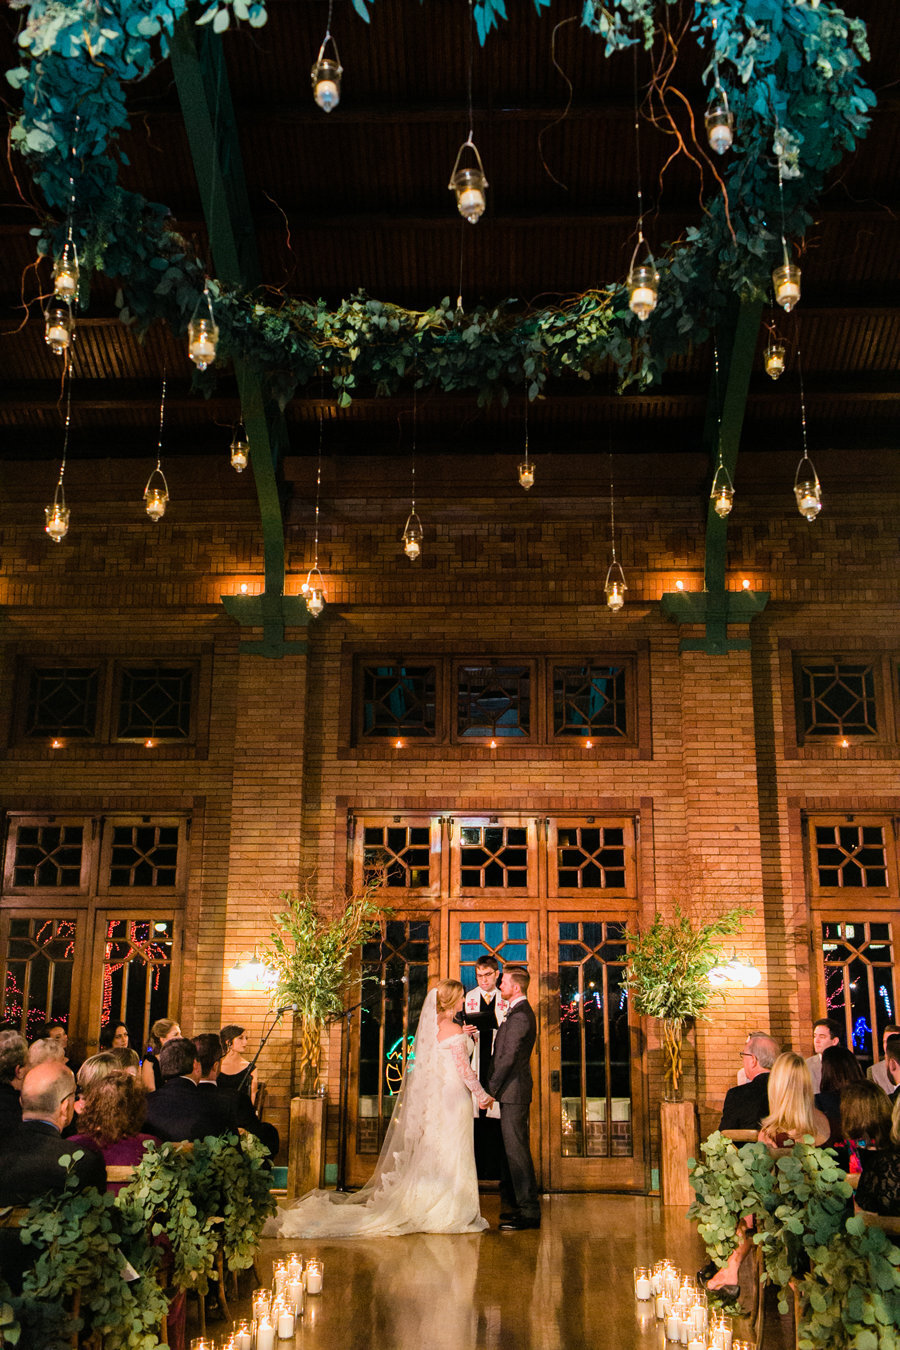 A lush and romantic wedding ceremony at the beautiful Cafe Brauer in Chicago.